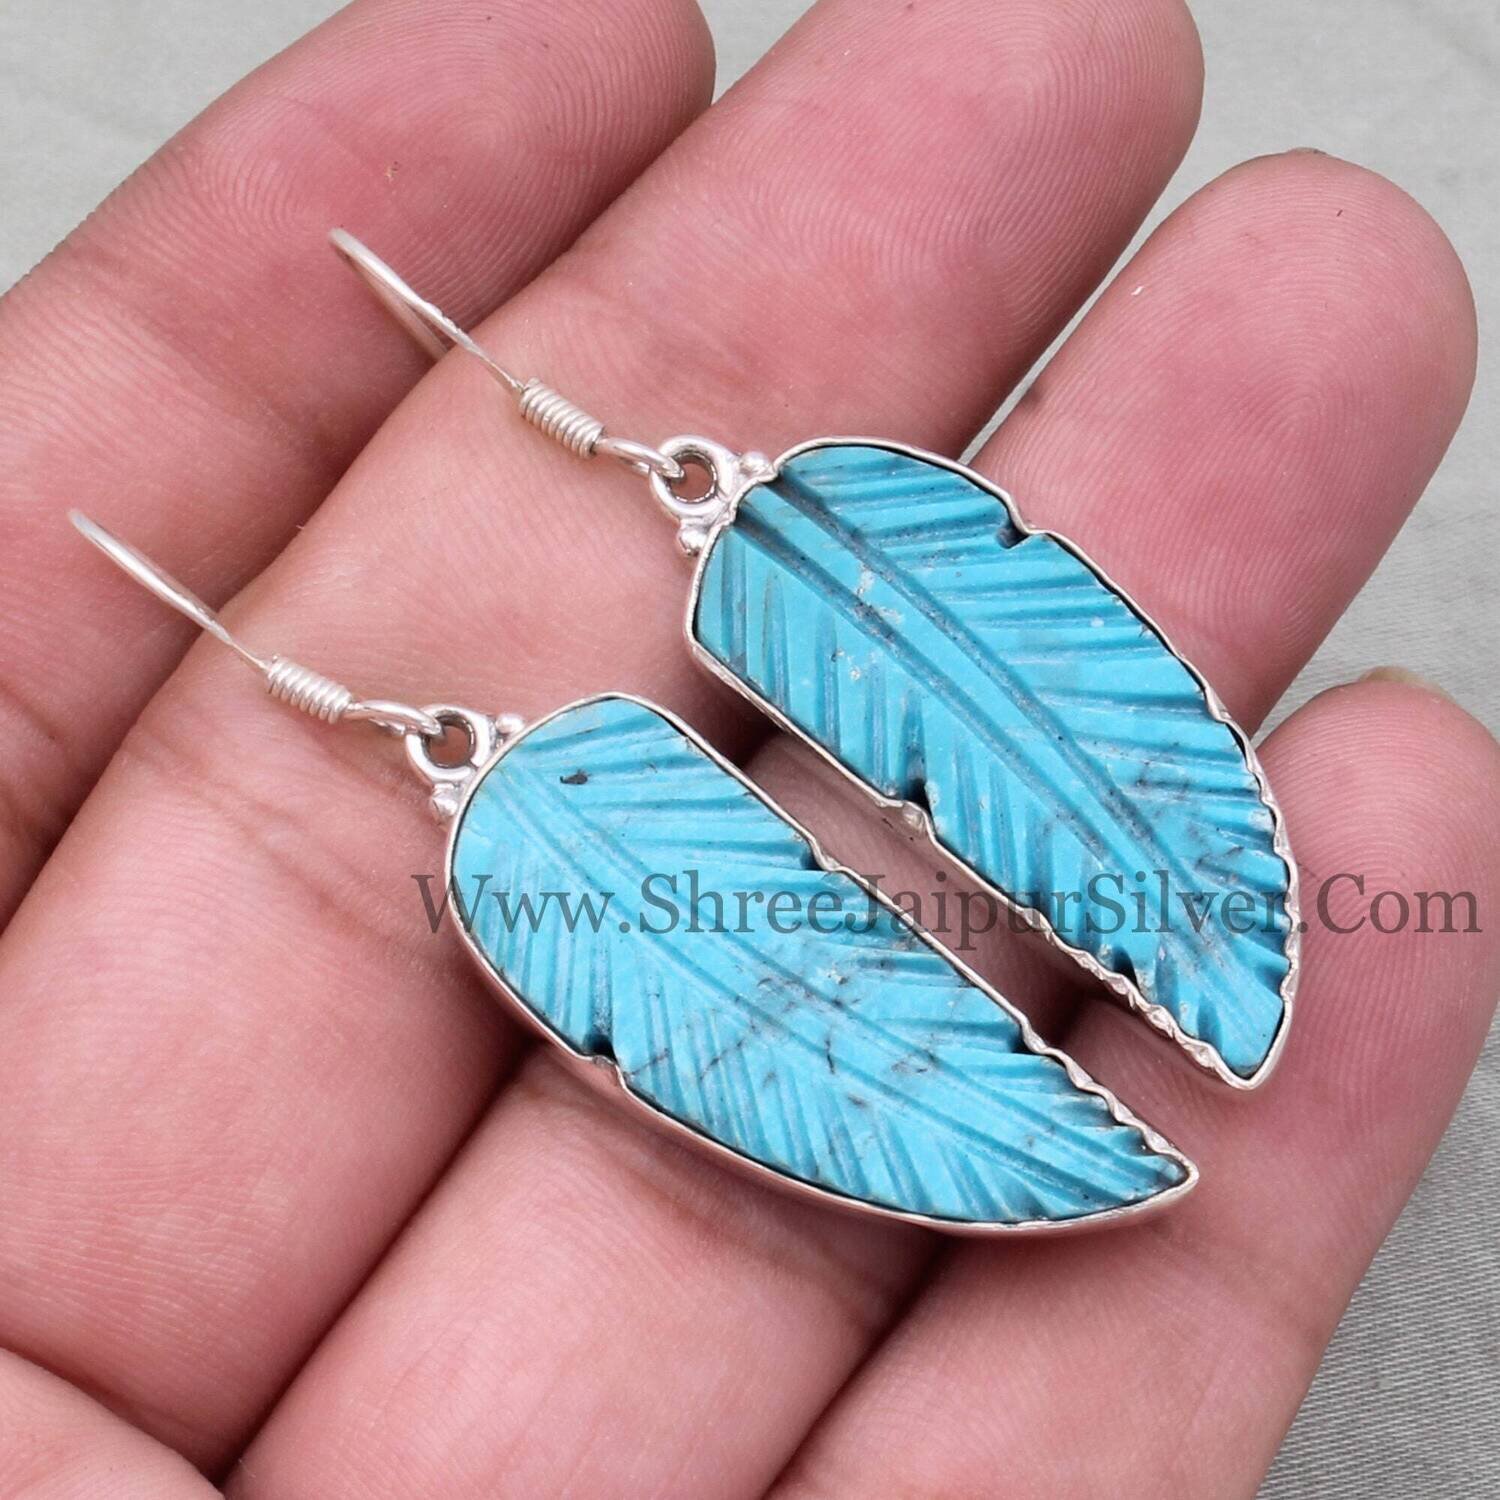 Rare Turquoise Engraved Feather Gemstone Solid 925 Sterling Silver Earrings For Women, Handmade Earrings Gifts For Wedding Anniversary